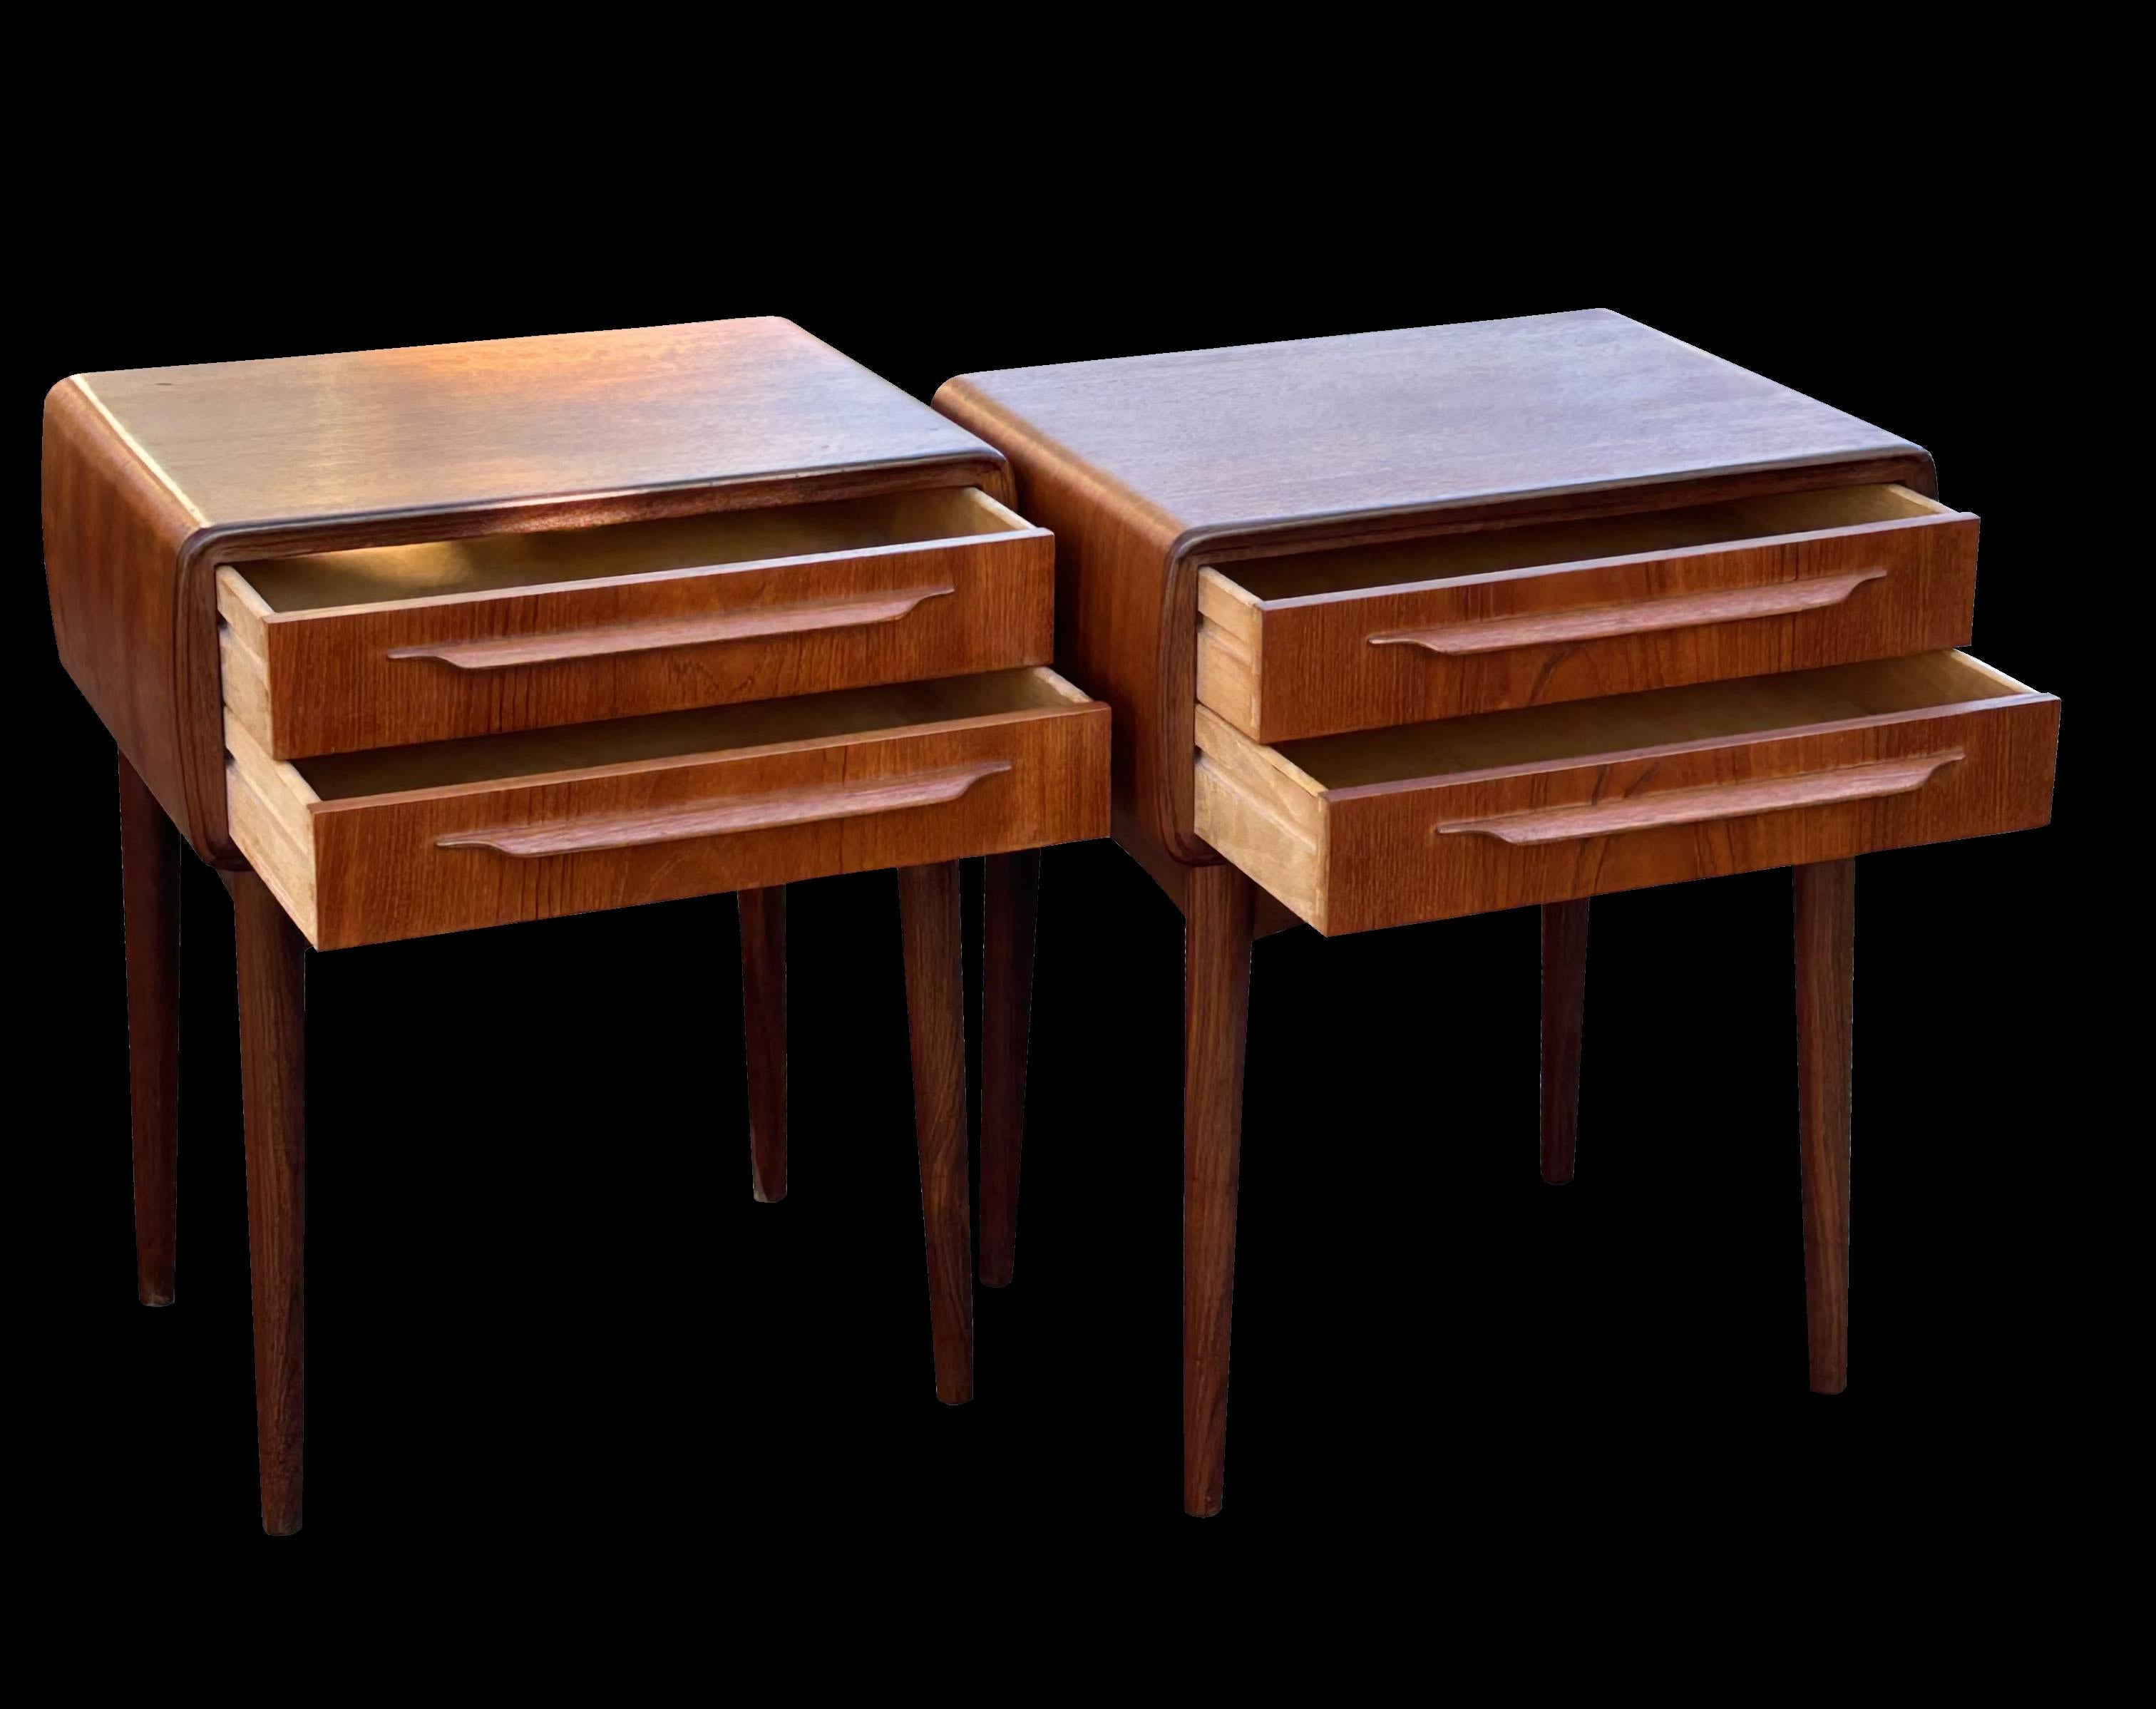 Pair of Bedside Tables In Teak by Johannes Andersen for CFC Silkeborg In Good Condition For Sale In Little Burstead, Essex